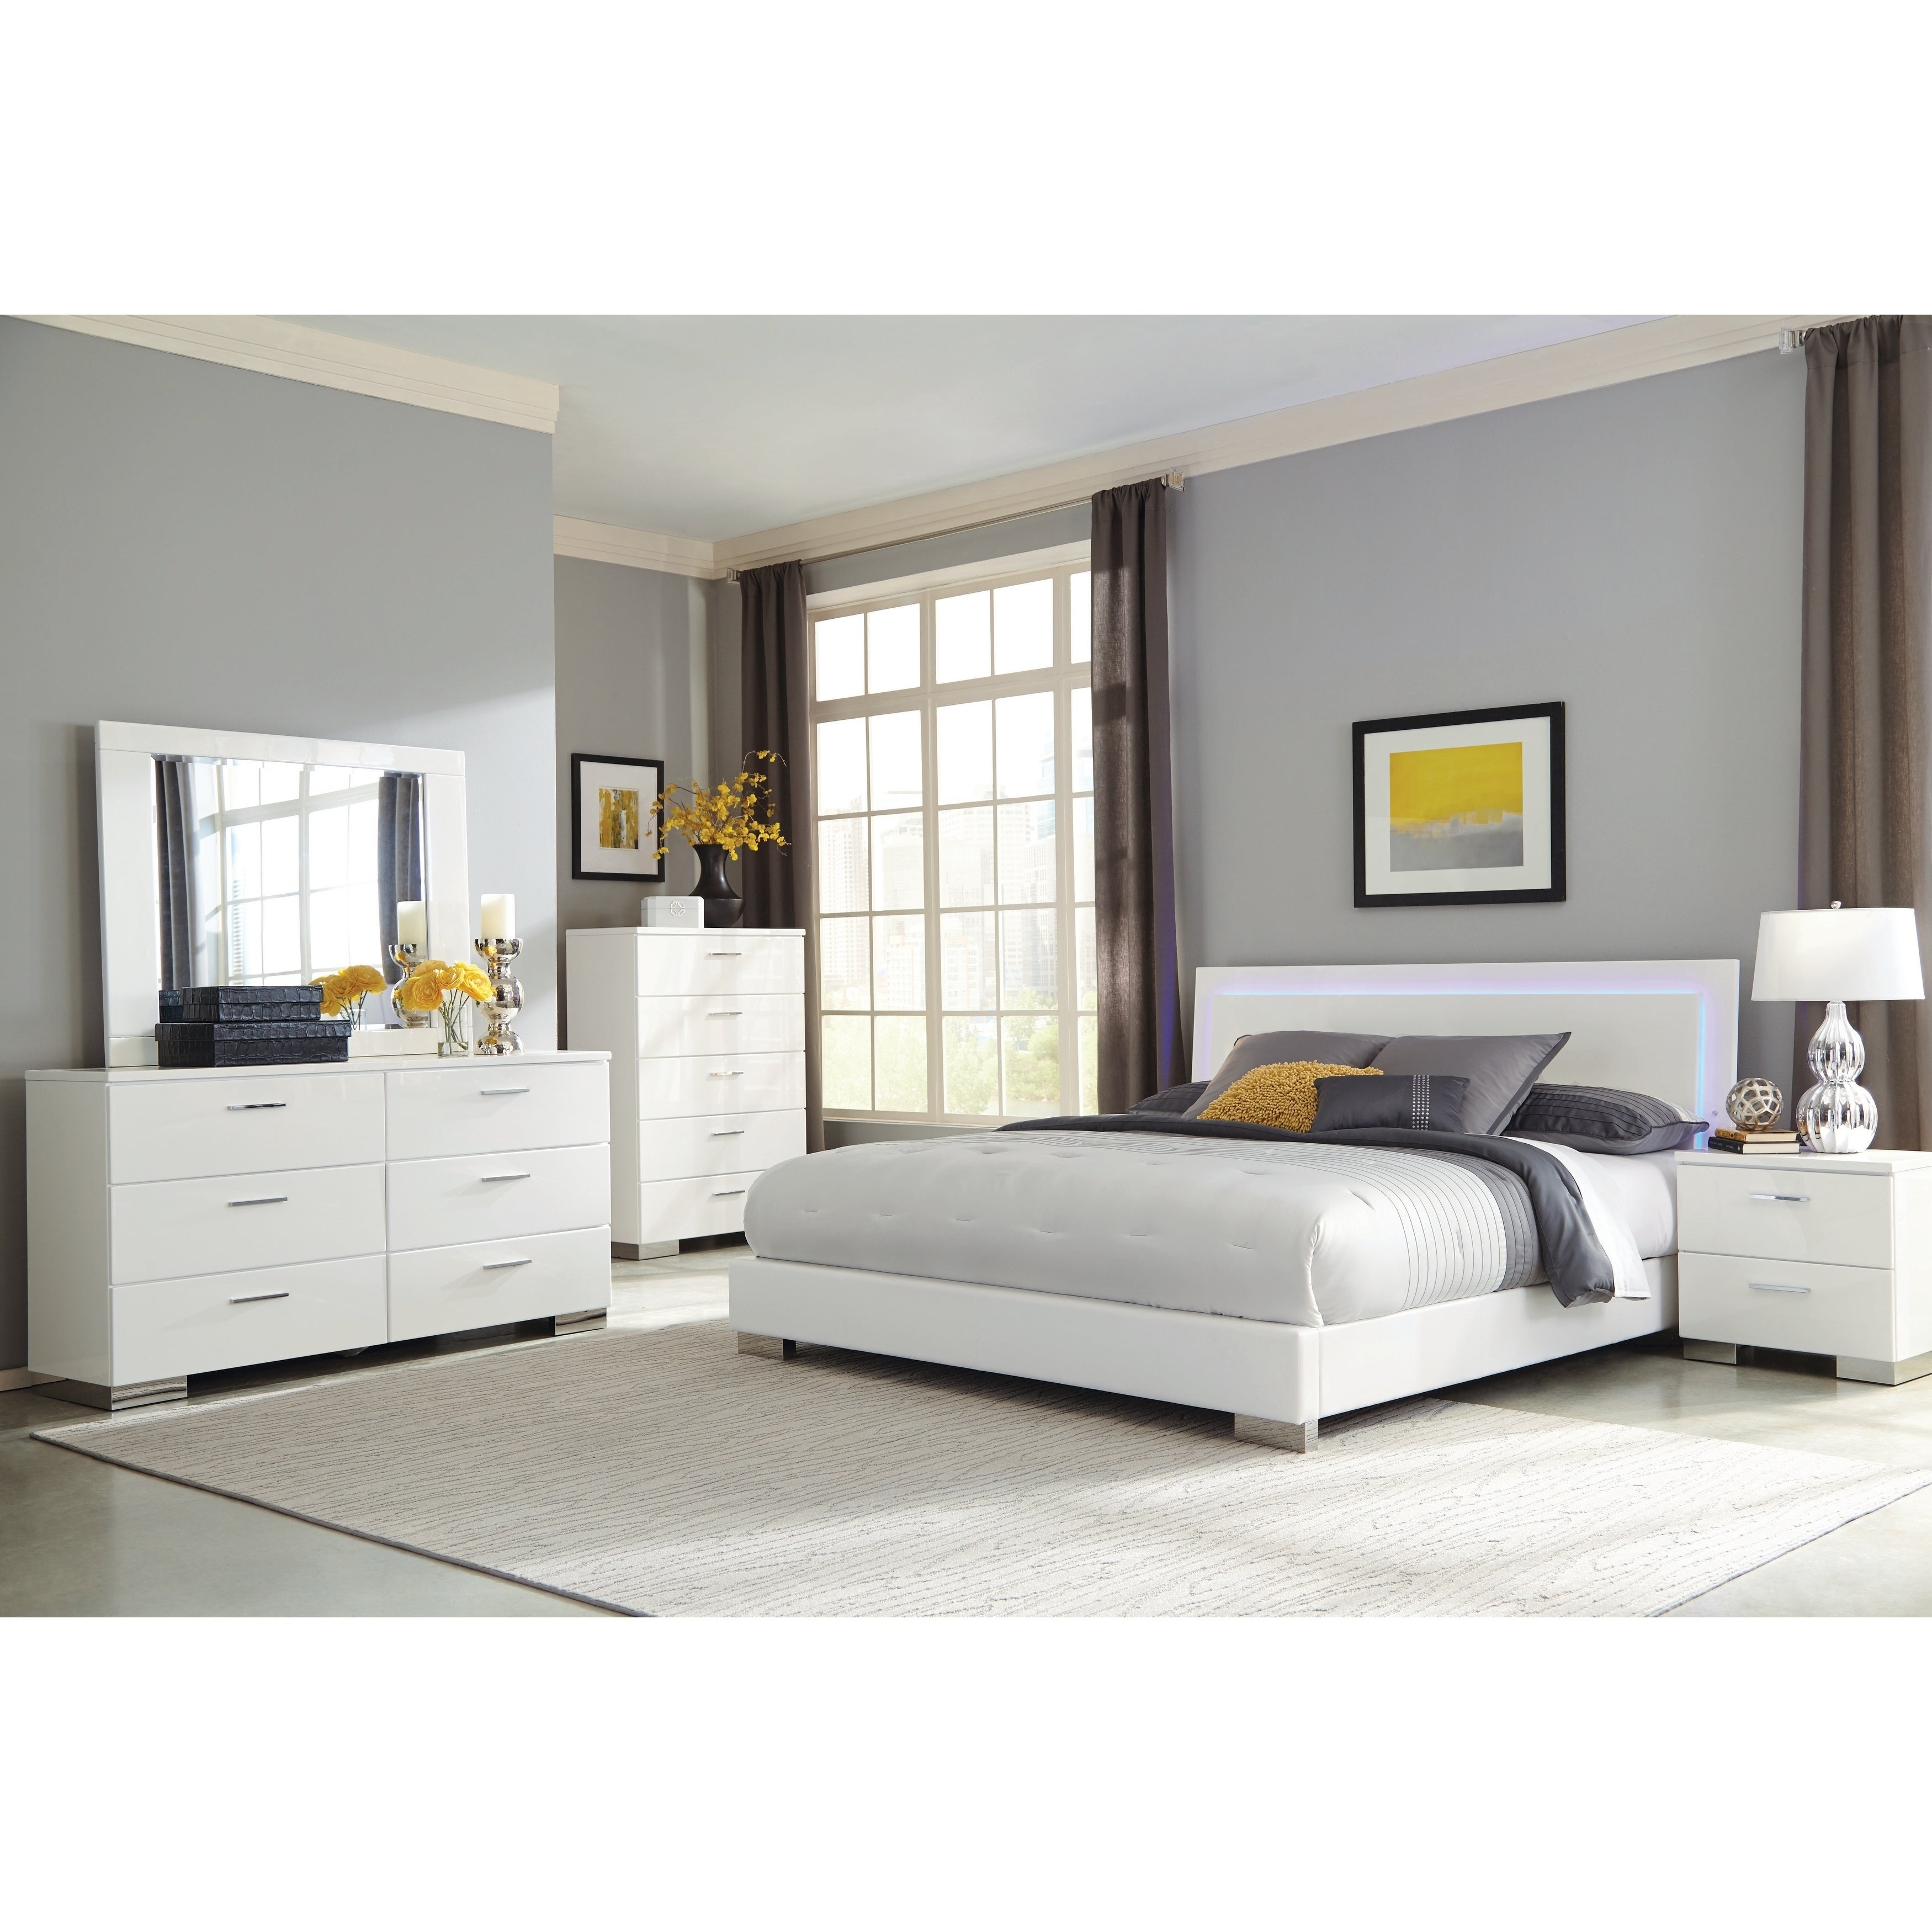 Strick Bolton Alice White 4 Piece Bedroom Set With Led Headboard pertaining to proportions 3500 X 3500